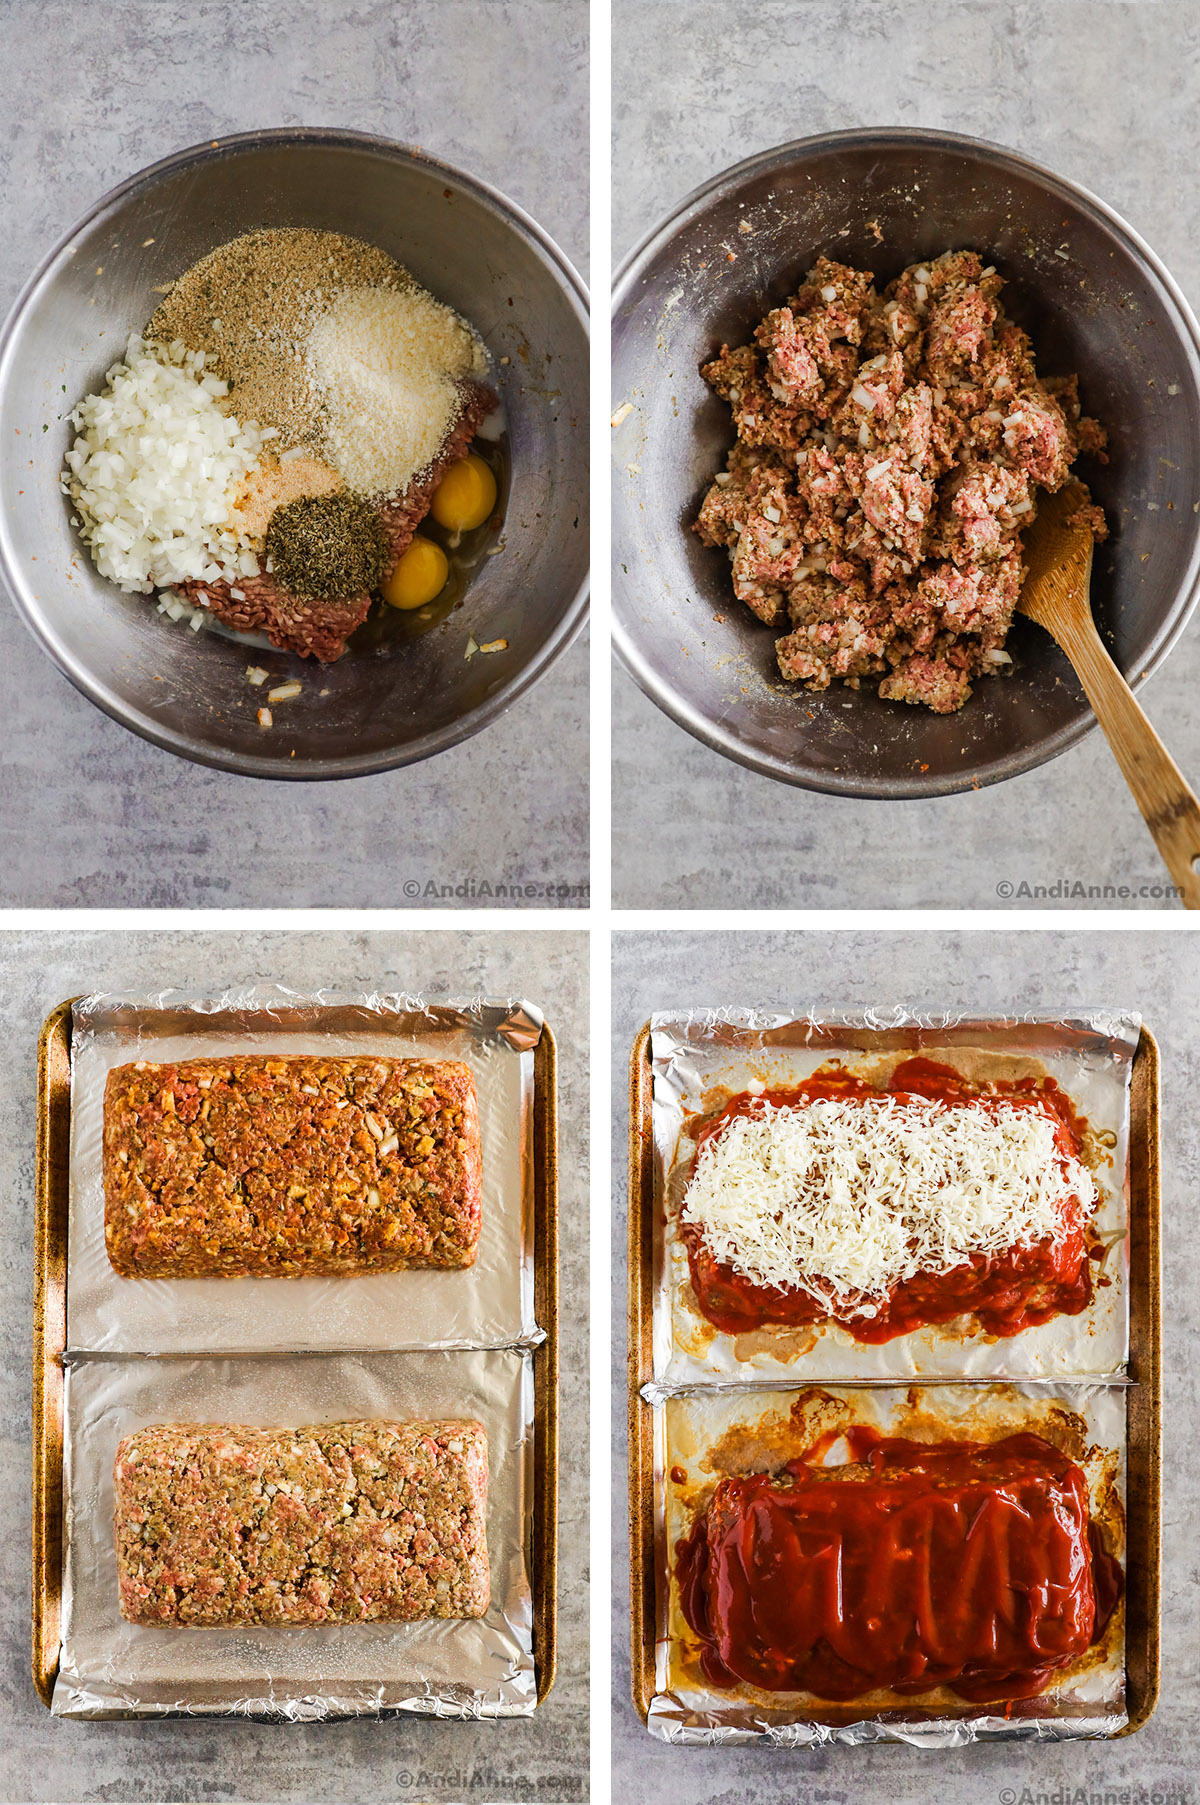 Four images of steps to make recipe. First is bowl with meatloaf ingredients dumped in. Second is ground beef meatloaf mixture in bowl all mixed together. Third is two raw meatloaves on a baking sheet. Fourth is spaghetti sauce and mozzarella cheese spread on to meatloaves.